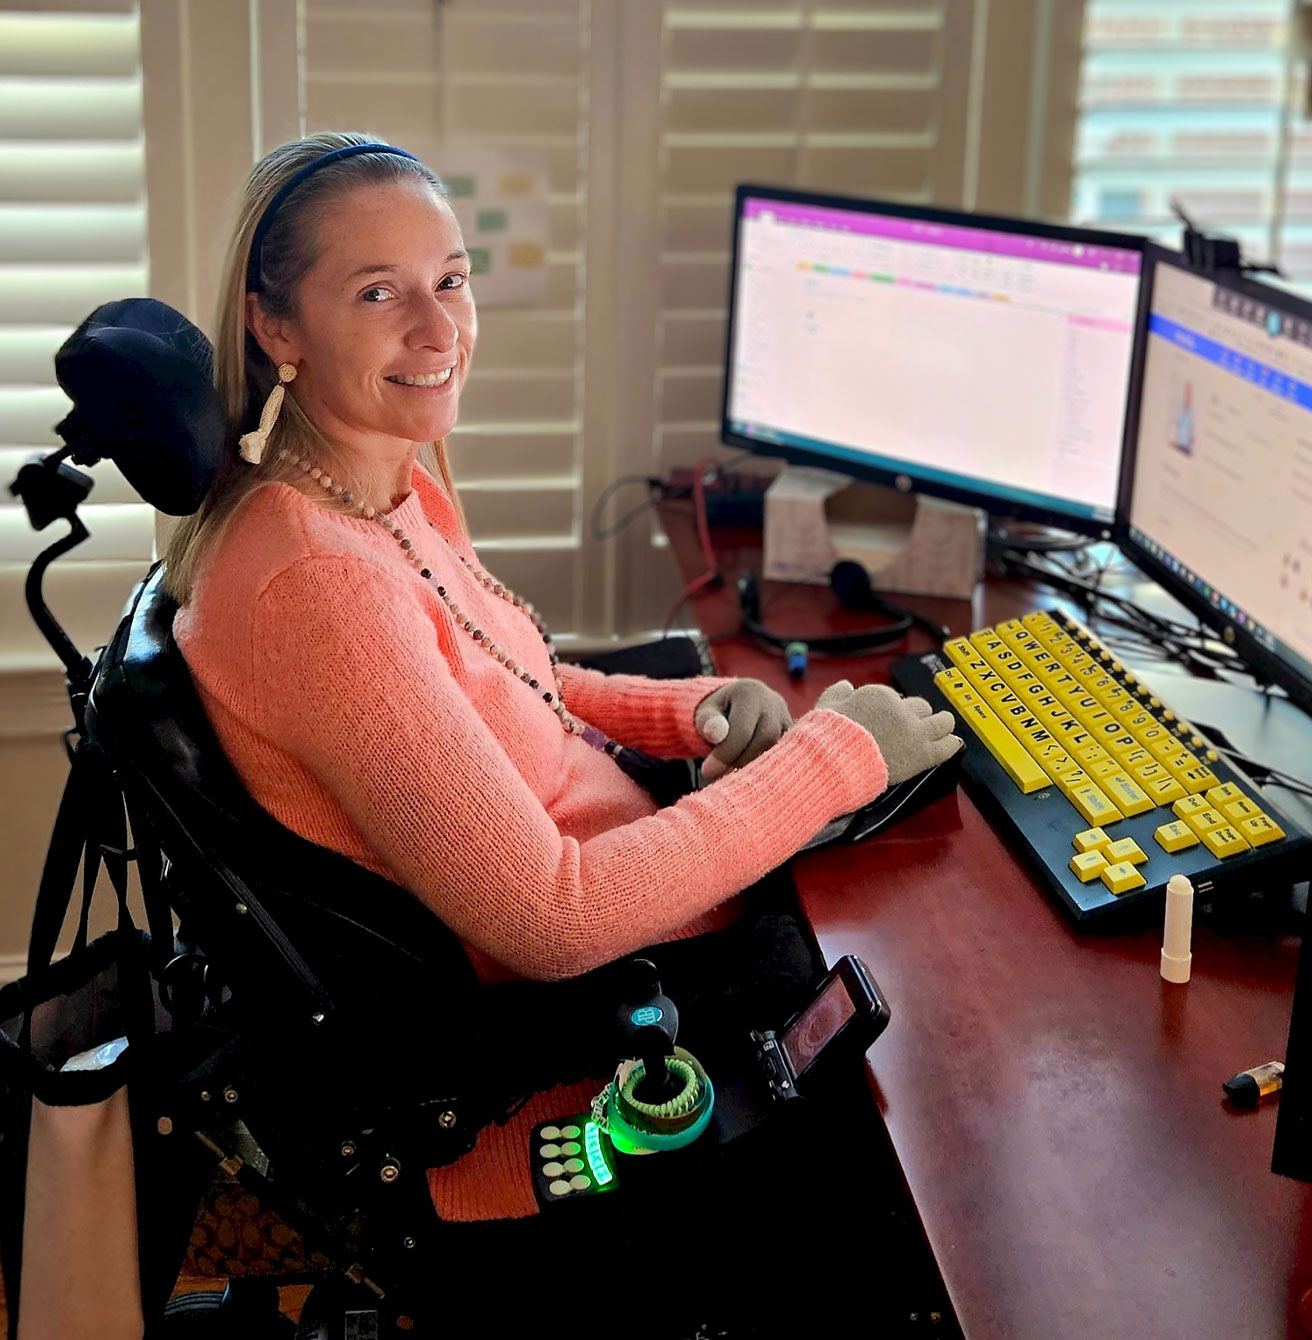 Ali smiling seated in her wheelchair in front of her computer.